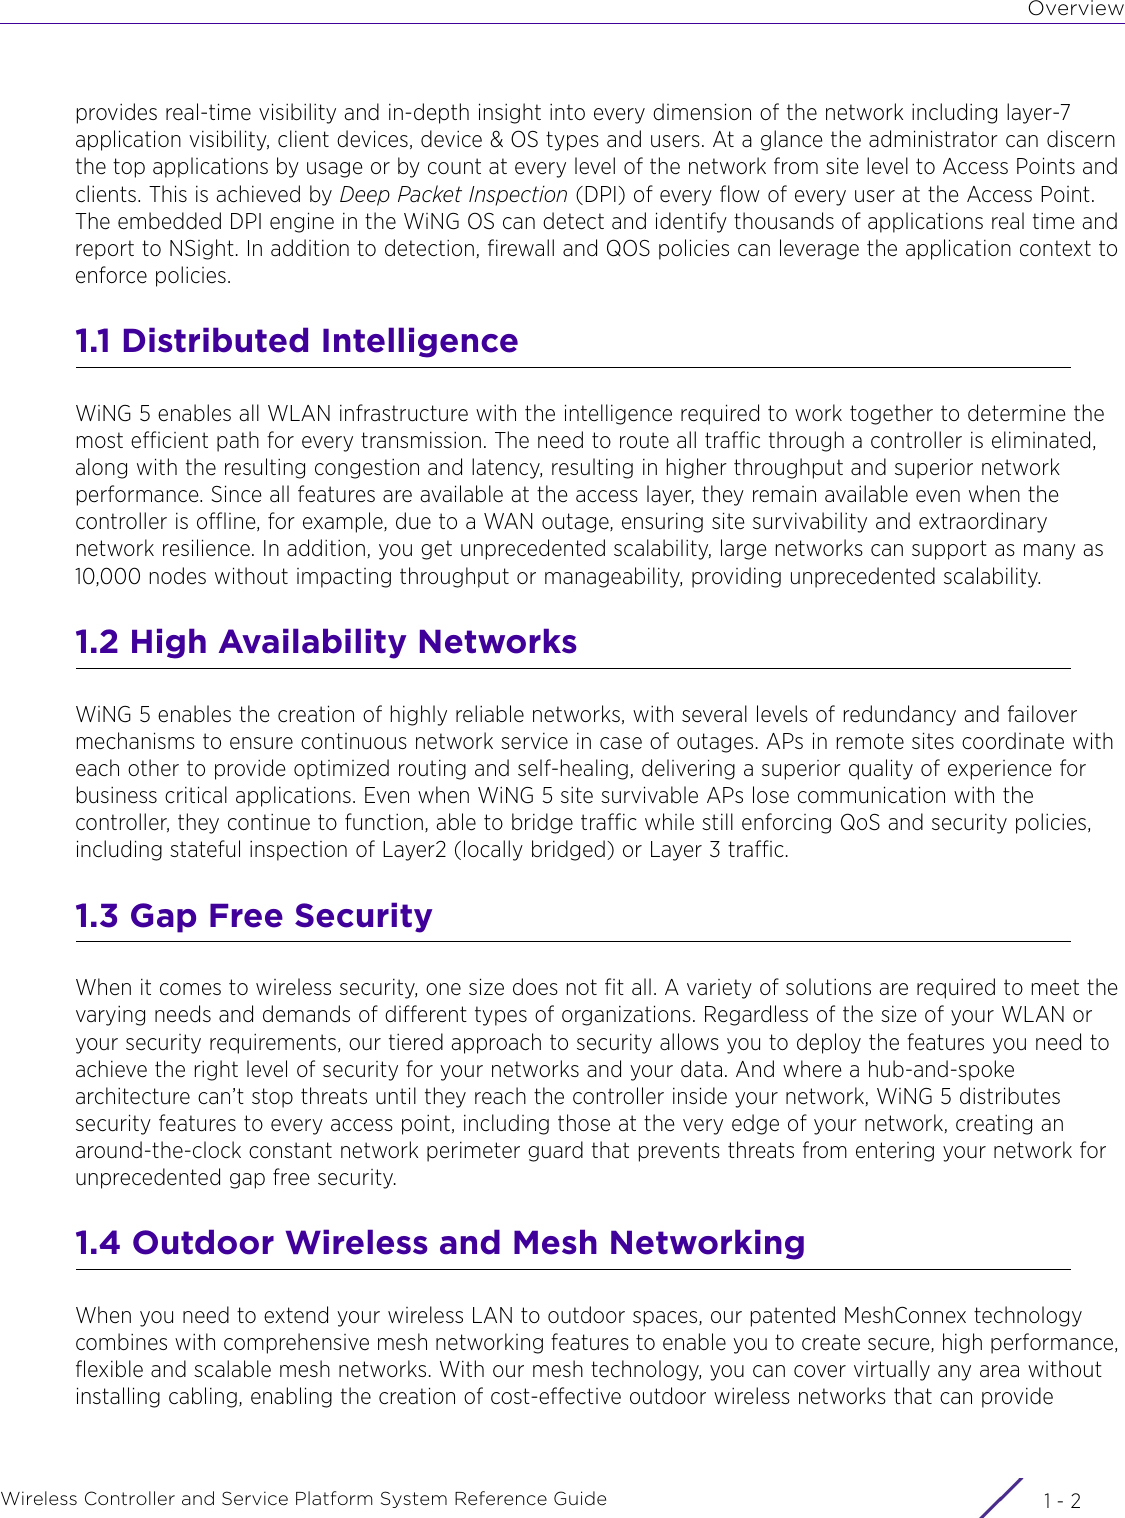 OverviewWireless Controller and Service Platform System Reference Guide  1 - 2provides real-time visibility and in-depth insight into every dimension of the network including layer-7 application visibility, client devices, device &amp; OS types and users. At a glance the administrator can discern the top applications by usage or by count at every level of the network from site level to Access Points and clients. This is achieved by Deep Packet Inspection (DPI) of every flow of every user at the Access Point. The embedded DPI engine in the WiNG OS can detect and identify thousands of applications real time and report to NSight. In addition to detection, firewall and QOS policies can leverage the application context to enforce policies.1.1 Distributed IntelligenceWiNG 5 enables all WLAN infrastructure with the intelligence required to work together to determine the most efficient path for every transmission. The need to route all traffic through a controller is eliminated, along with the resulting congestion and latency, resulting in higher throughput and superior network performance. Since all features are available at the access layer, they remain available even when the controller is offline, for example, due to a WAN outage, ensuring site survivability and extraordinary network resilience. In addition, you get unprecedented scalability, large networks can support as many as 10,000 nodes without impacting throughput or manageability, providing unprecedented scalability.1.2 High Availability NetworksWiNG 5 enables the creation of highly reliable networks, with several levels of redundancy and failover mechanisms to ensure continuous network service in case of outages. APs in remote sites coordinate with each other to provide optimized routing and self-healing, delivering a superior quality of experience for business critical applications. Even when WiNG 5 site survivable APs lose communication with the controller, they continue to function, able to bridge traffic while still enforcing QoS and security policies, including stateful inspection of Layer2 (locally bridged) or Layer 3 traffic.1.3 Gap Free SecurityWhen it comes to wireless security, one size does not fit all. A variety of solutions are required to meet the varying needs and demands of different types of organizations. Regardless of the size of your WLAN or your security requirements, our tiered approach to security allows you to deploy the features you need to achieve the right level of security for your networks and your data. And where a hub-and-spoke architecture can’t stop threats until they reach the controller inside your network, WiNG 5 distributes security features to every access point, including those at the very edge of your network, creating an around-the-clock constant network perimeter guard that prevents threats from entering your network for unprecedented gap free security.1.4 Outdoor Wireless and Mesh NetworkingWhen you need to extend your wireless LAN to outdoor spaces, our patented MeshConnex technology combines with comprehensive mesh networking features to enable you to create secure, high performance, flexible and scalable mesh networks. With our mesh technology, you can cover virtually any area without installing cabling, enabling the creation of cost-effective outdoor wireless networks that can provide 